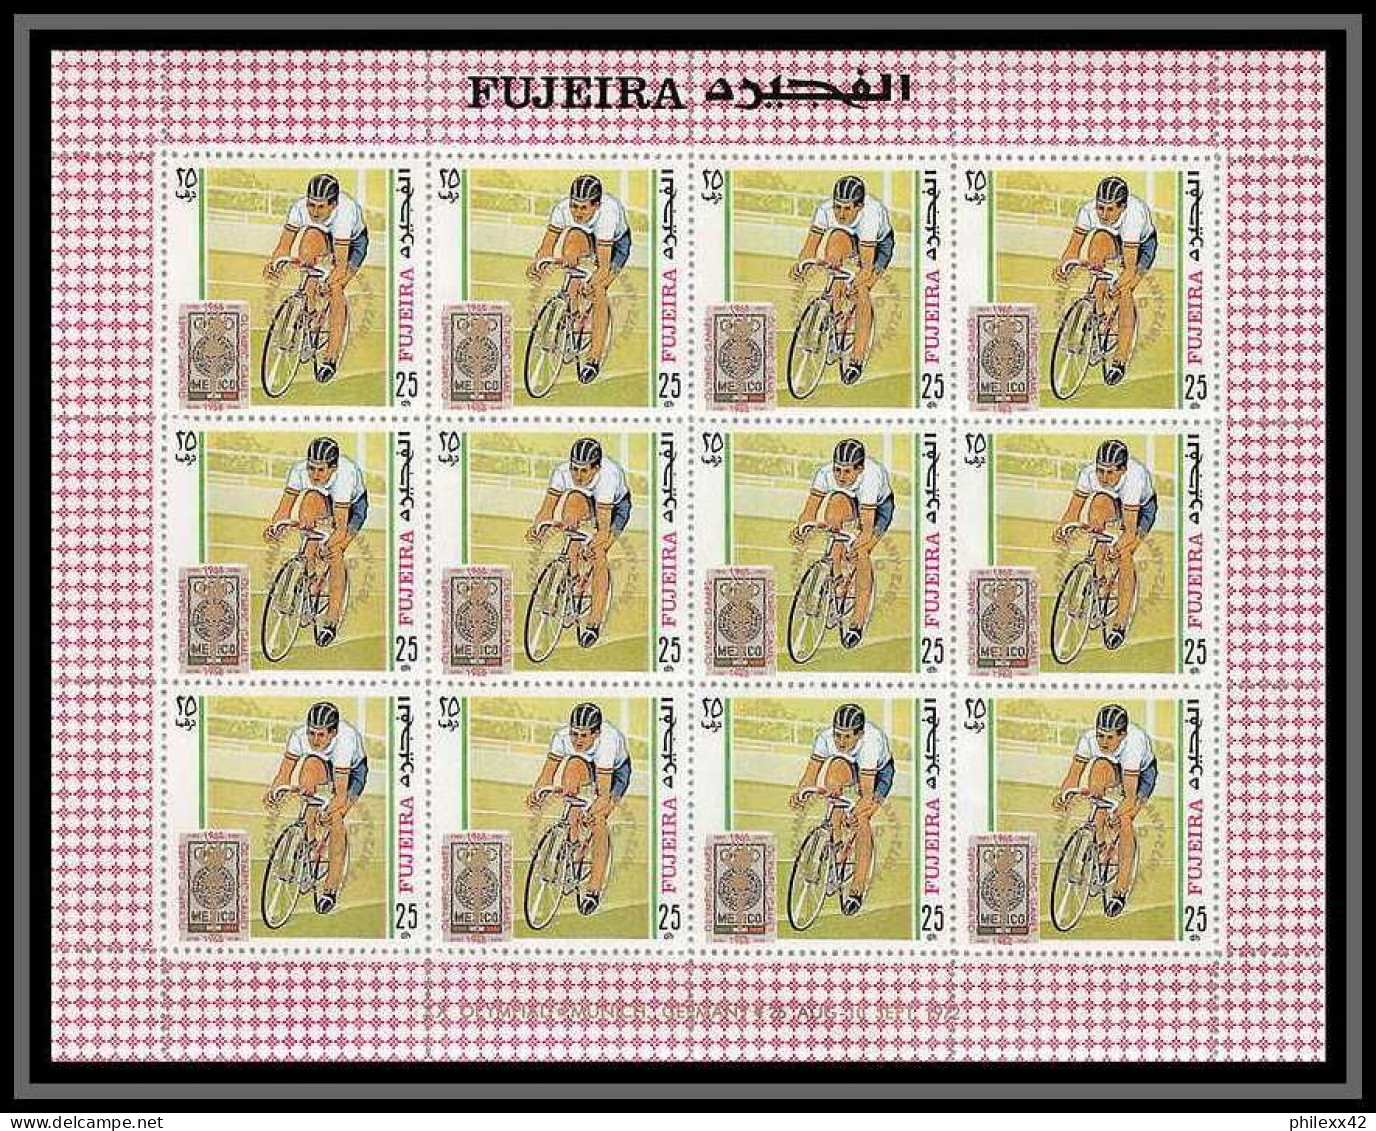 183a Fujeira MNH ** N° 320 / 329 A overprint gold jeux olympiques (olympic games) mexico 68 cycling feuilles (sheets)